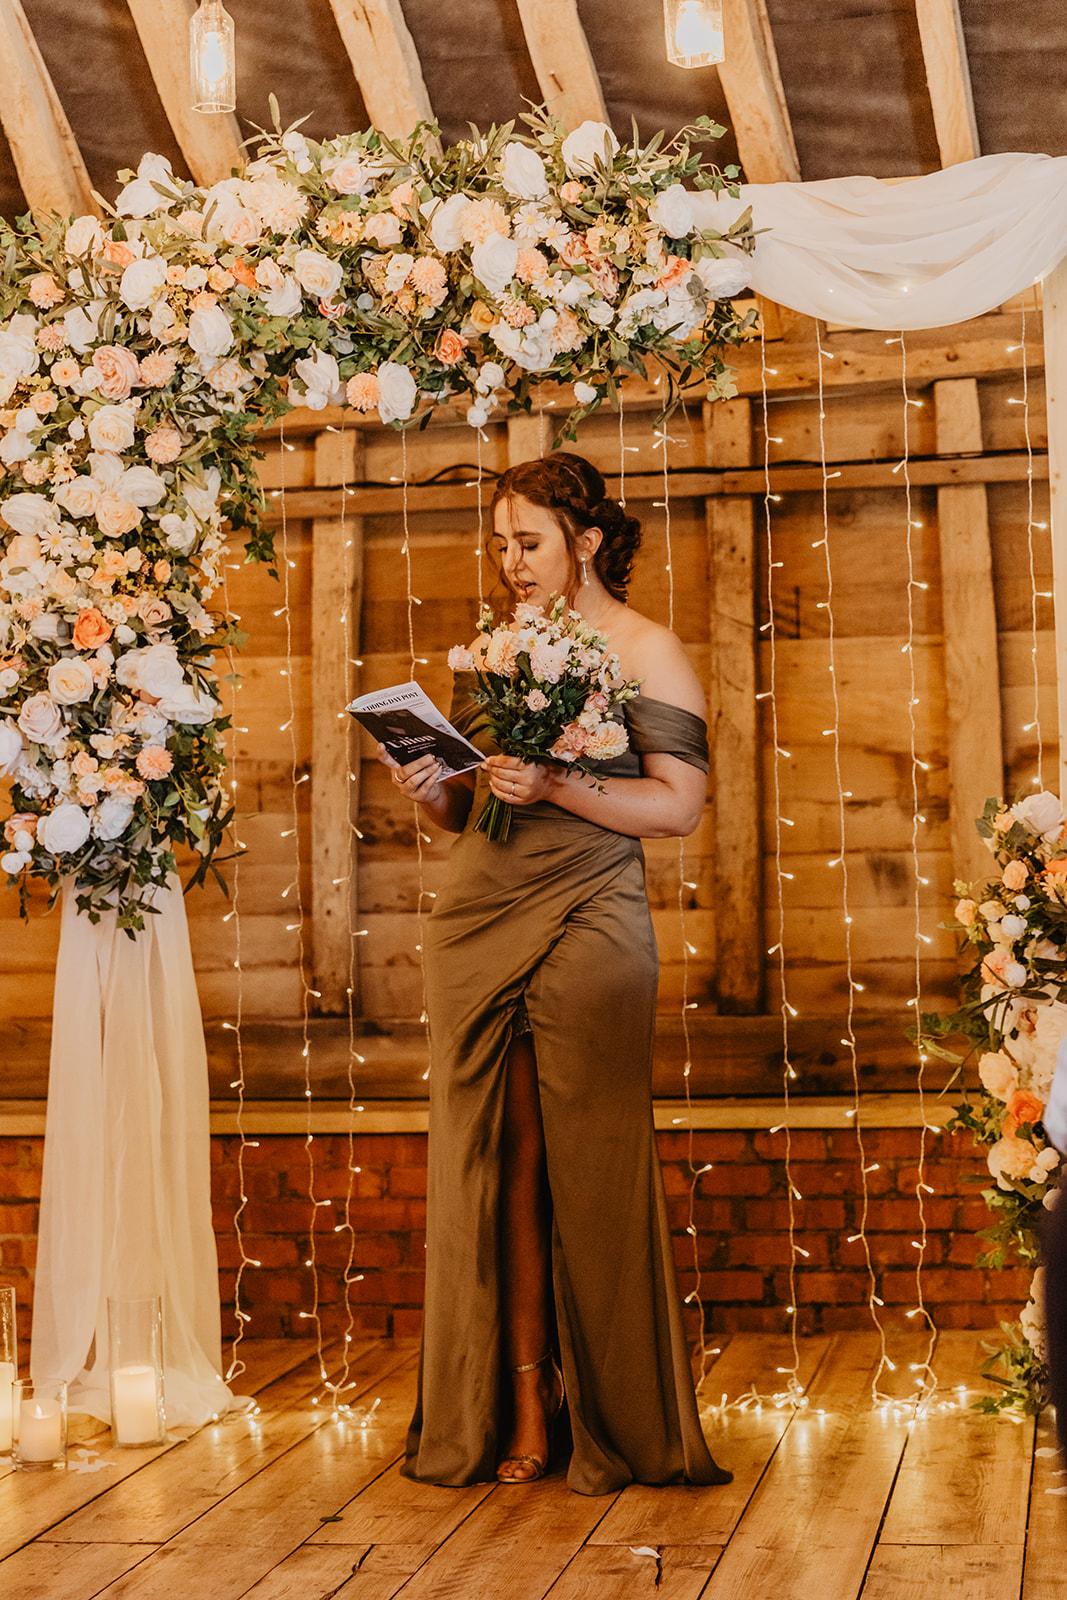 Reading at a Southlands barn wedding, Sussex. Photo by OliveJoy Photography.